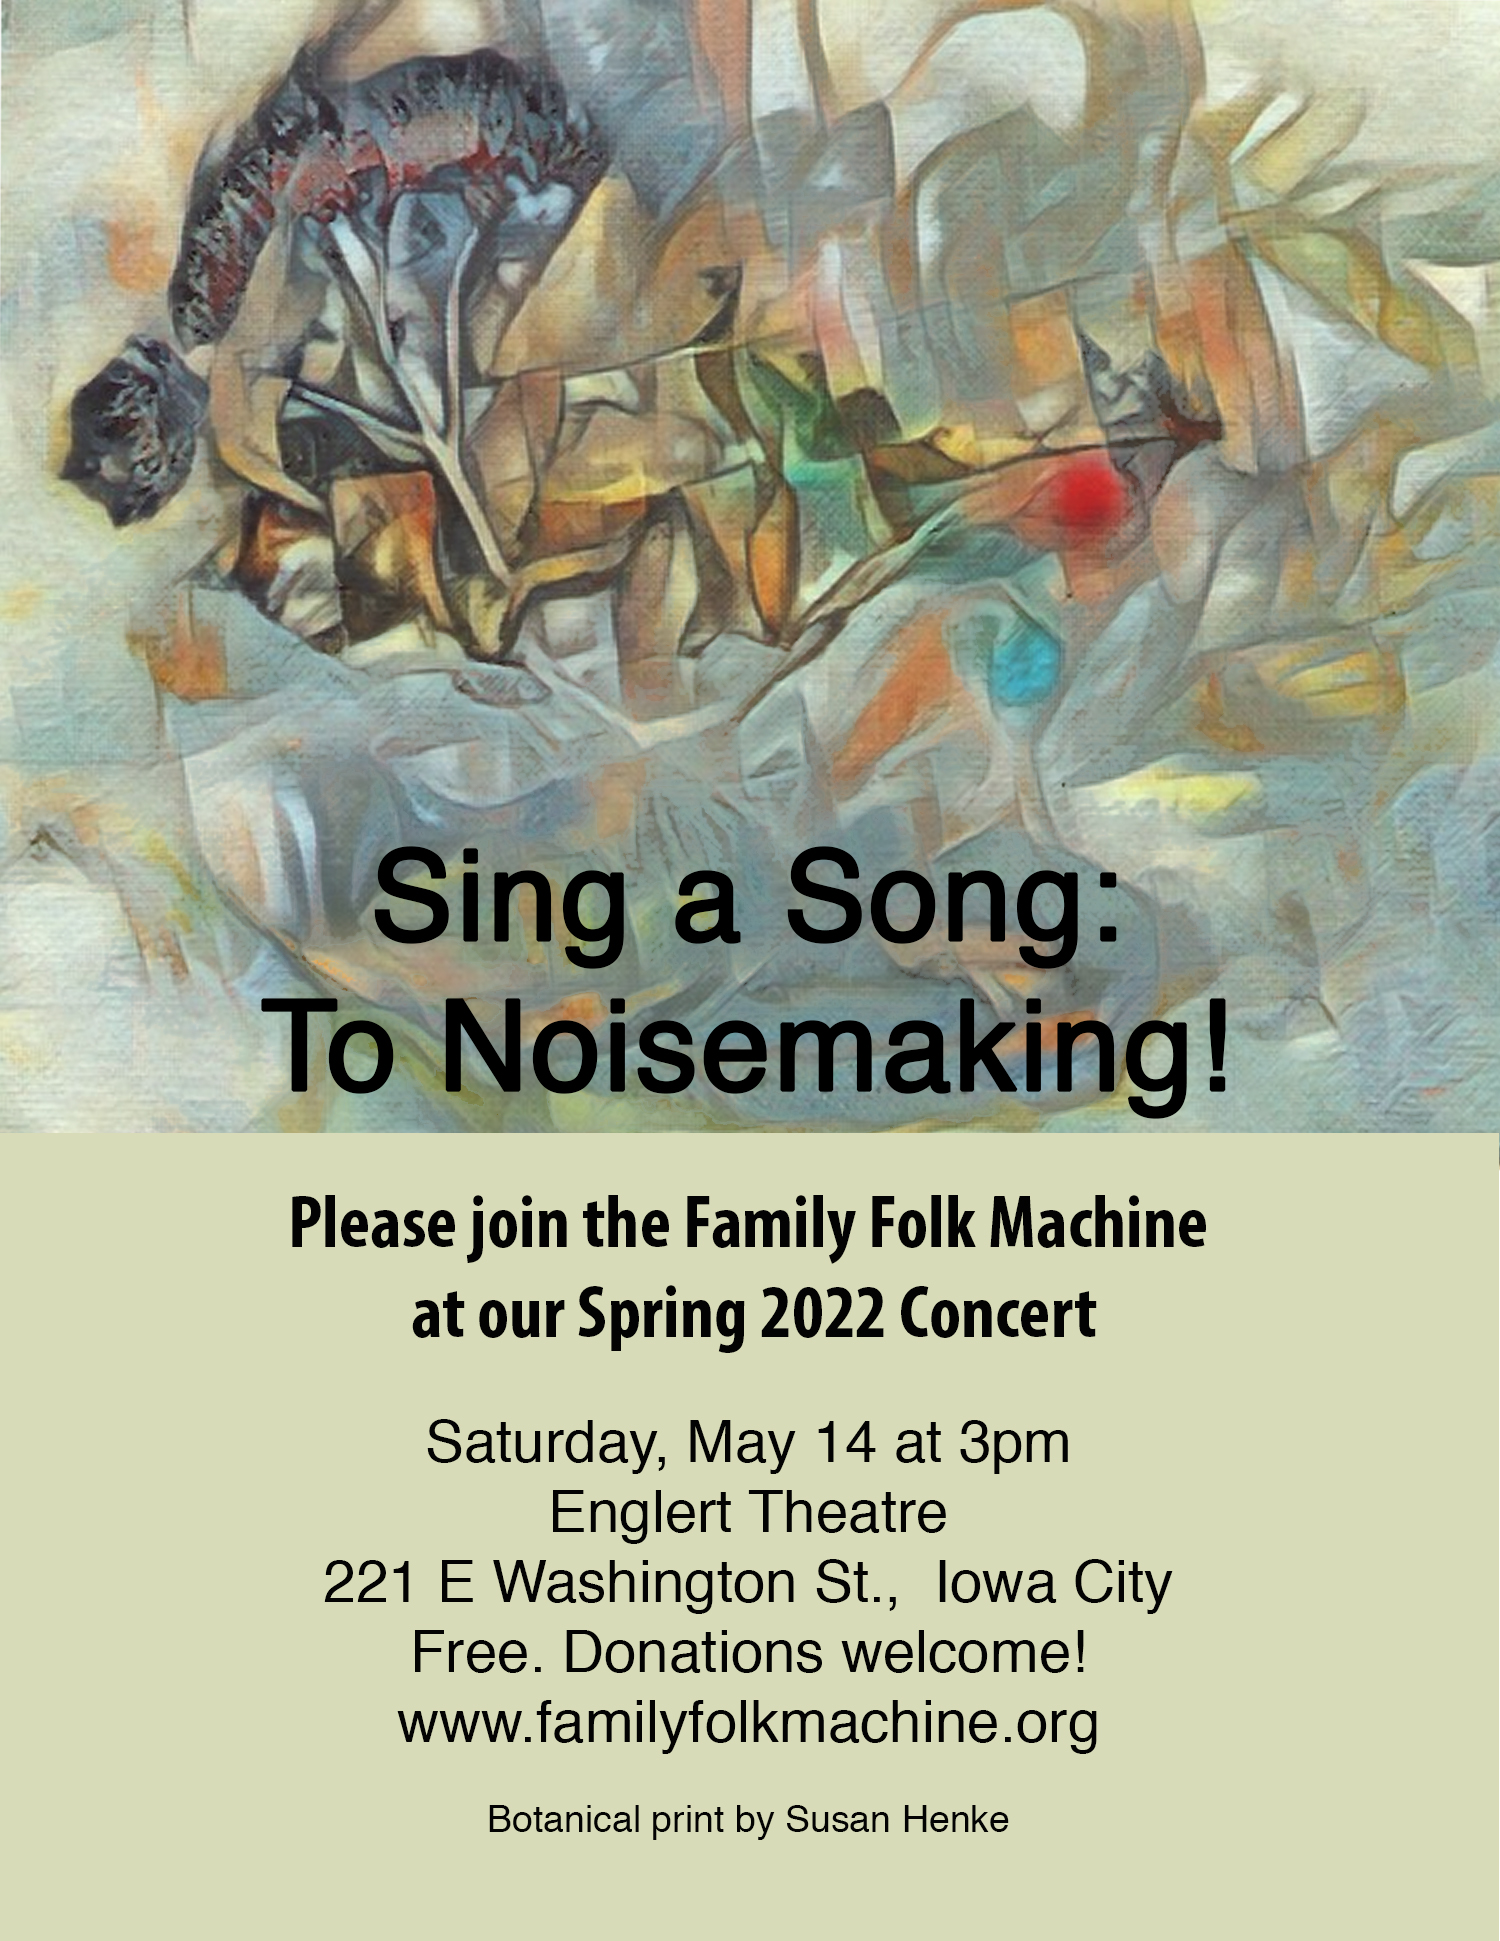 Sing a Song: To Noisemaking! Family Folk Machine Spring Concert